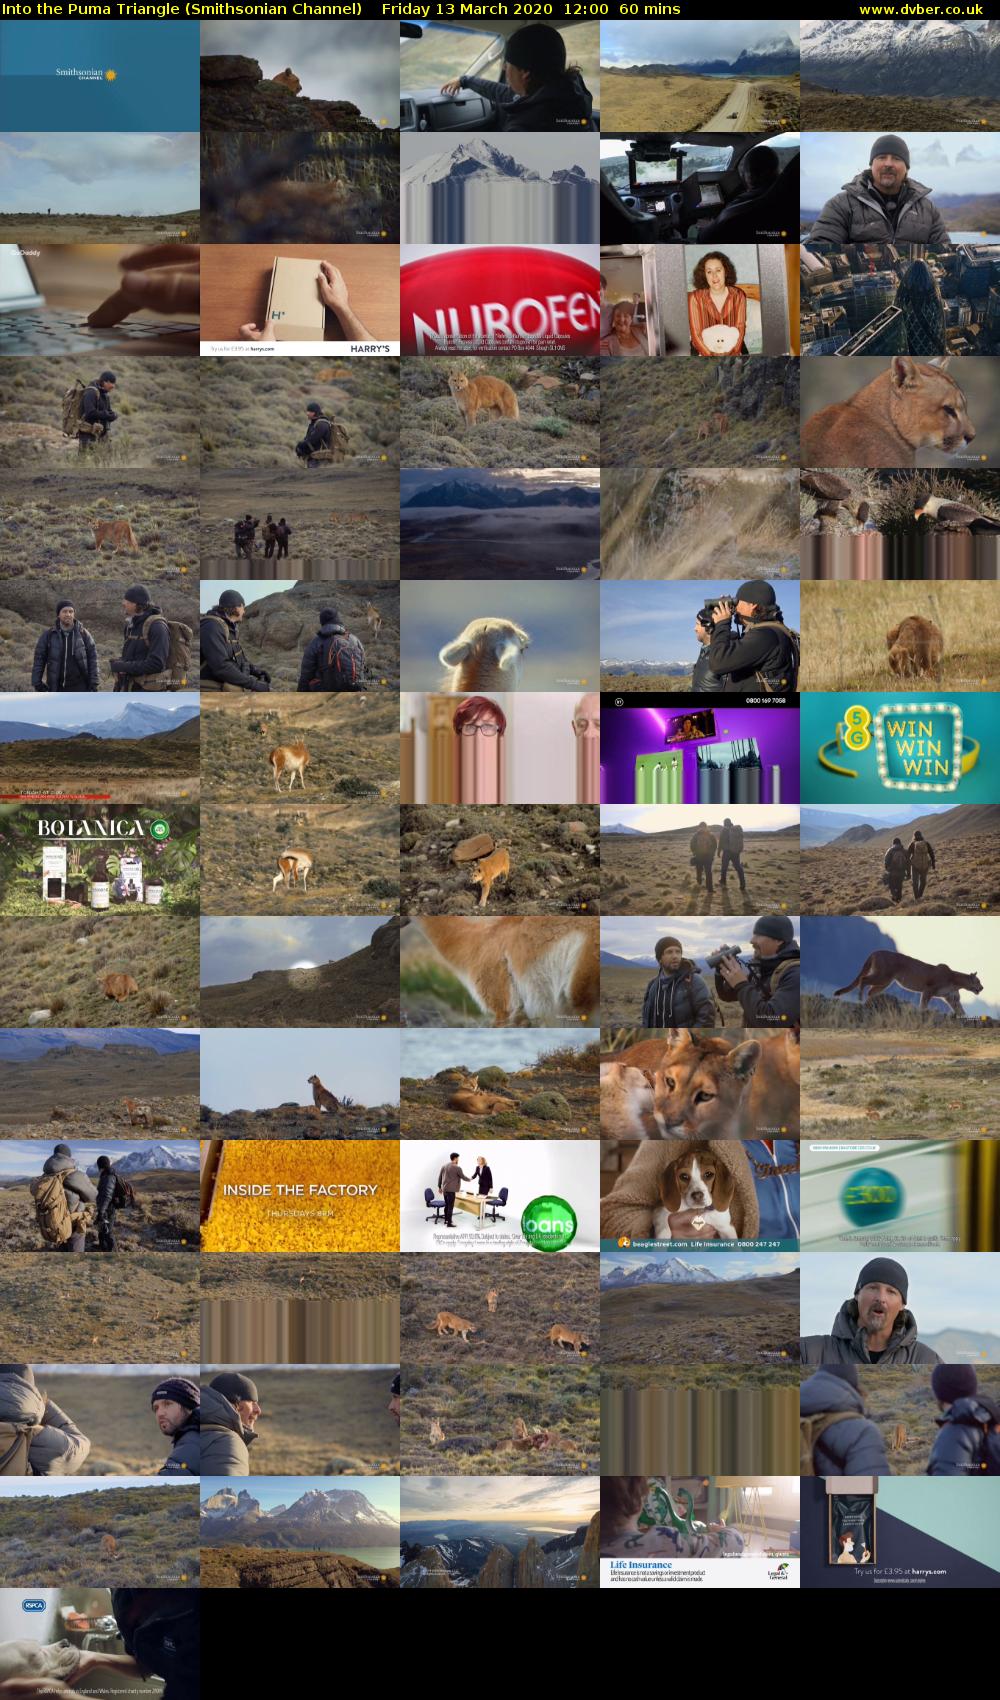 Into the Puma Triangle (Smithsonian Channel) Friday 13 March 2020 12:00 - 13:00